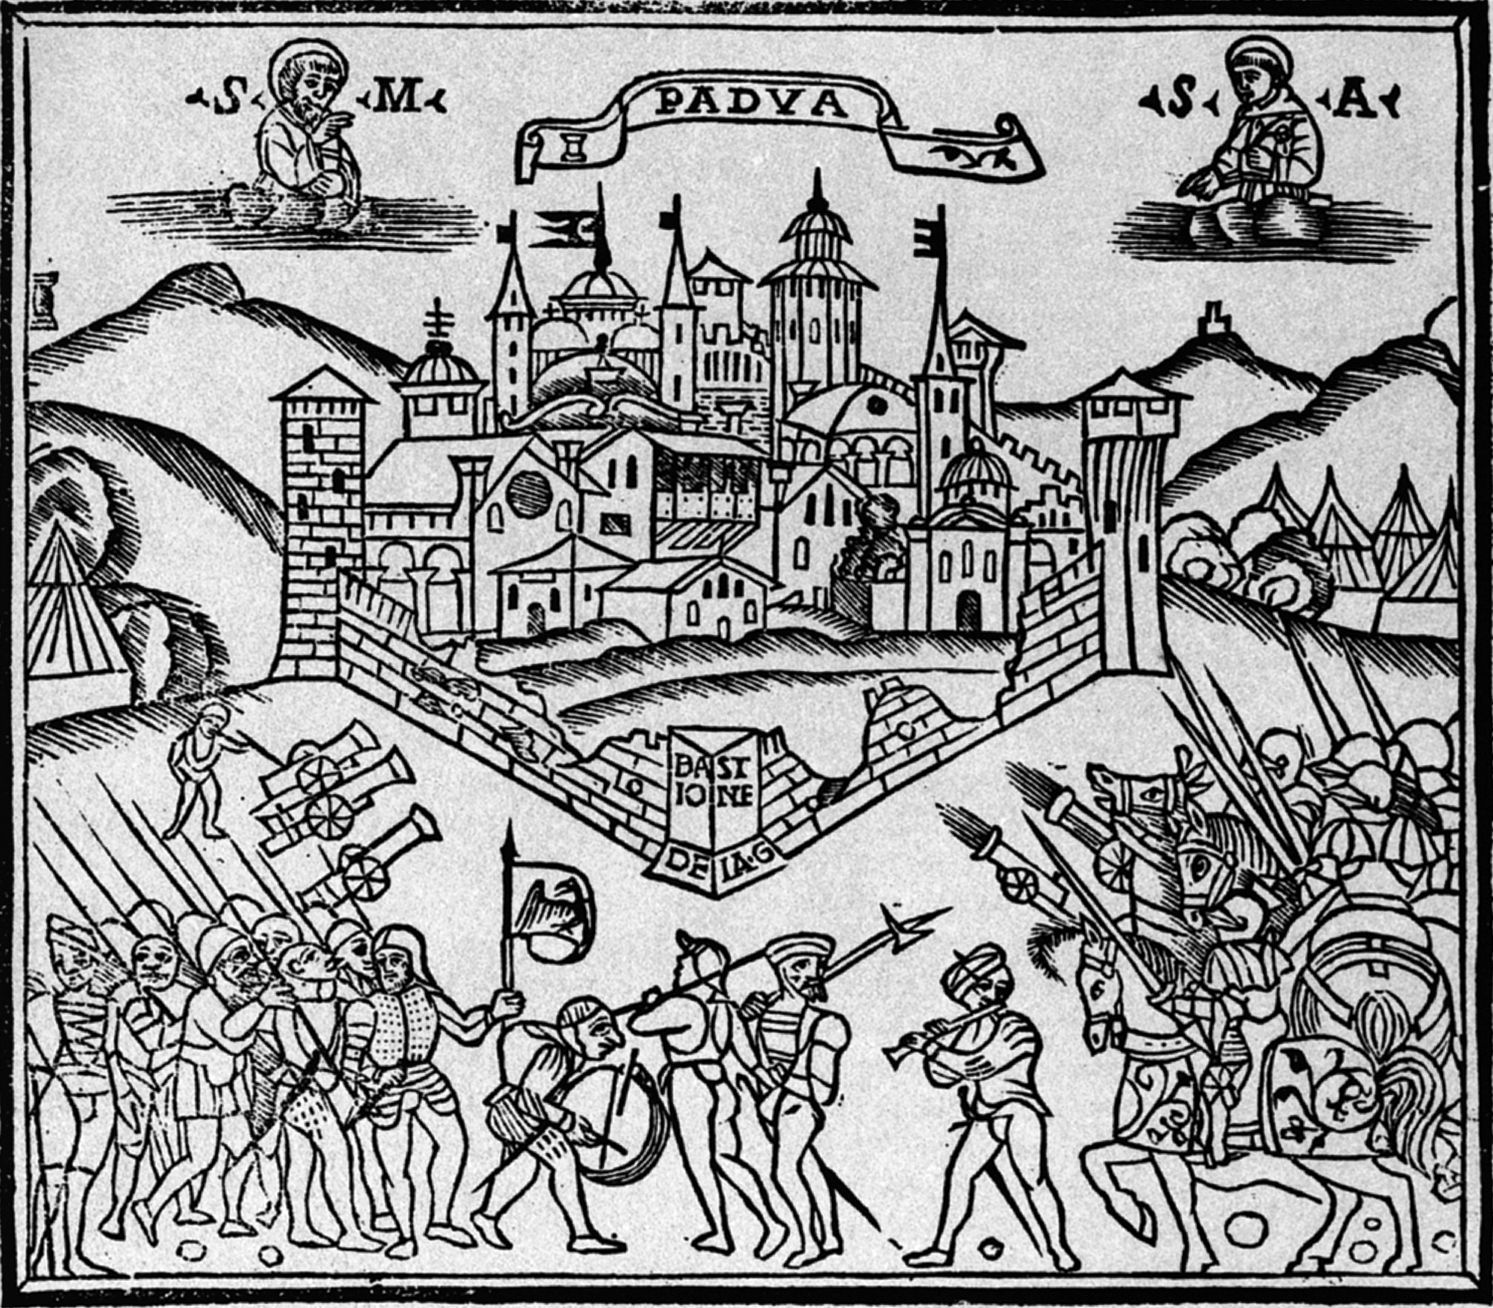 French troops lay siege to the Italian city of Padua during the siege of 1509 in this period woodcut. Soon, Louis controlled all of Lombardy.